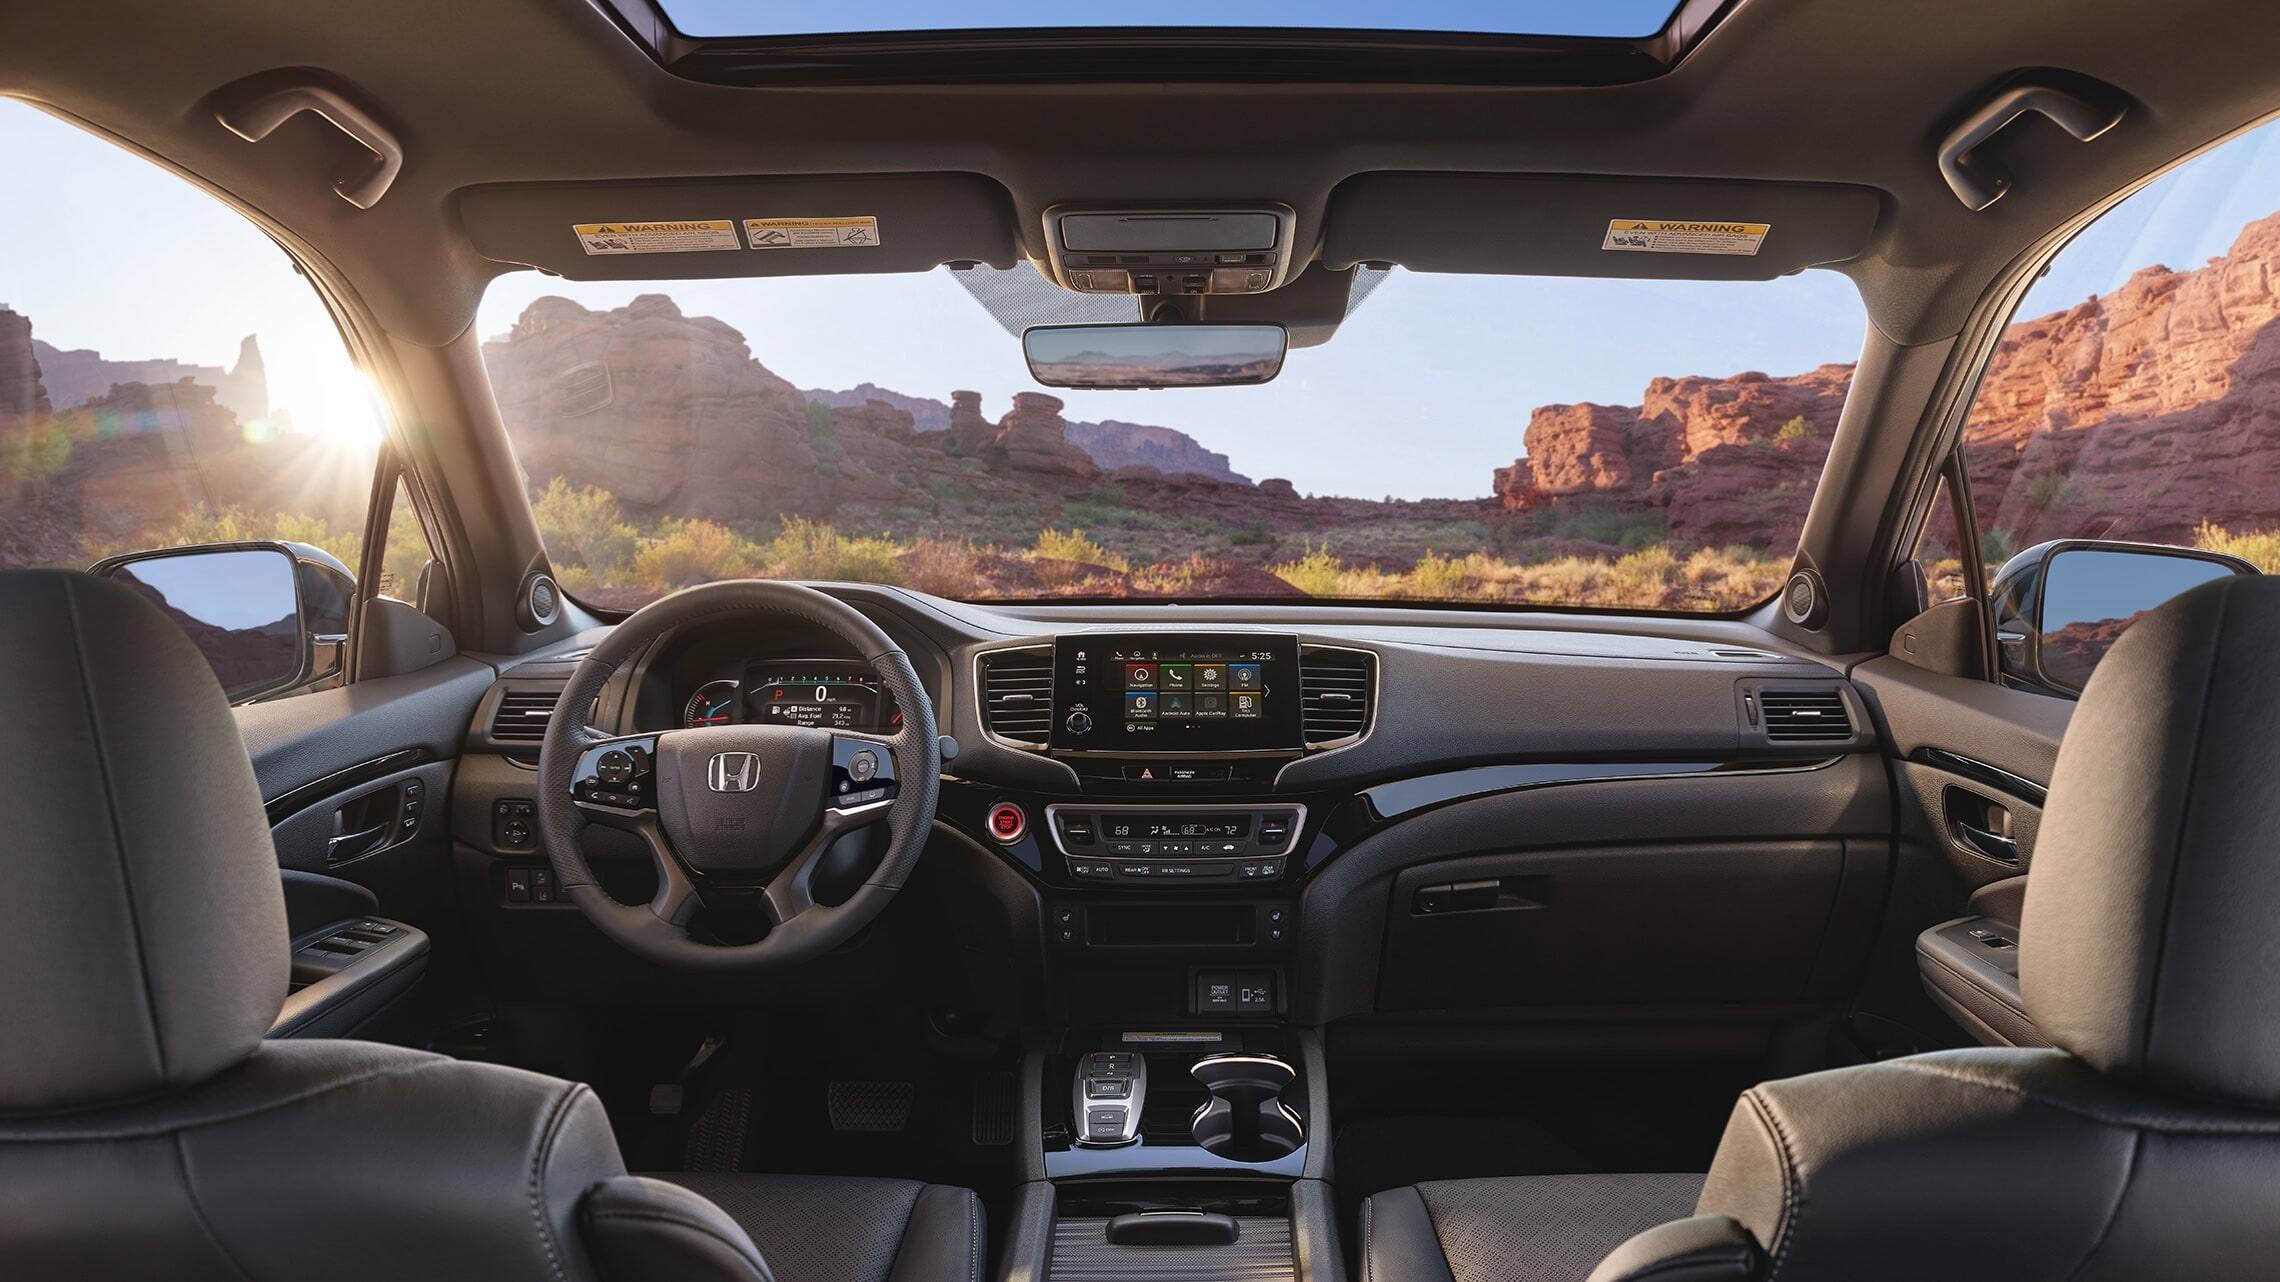 2019 Honda Passport Elite interior view with Black Leather interior showing the major instrument panel, featuring Apple CarPlay™ integration on the Display Audio touch-screen.